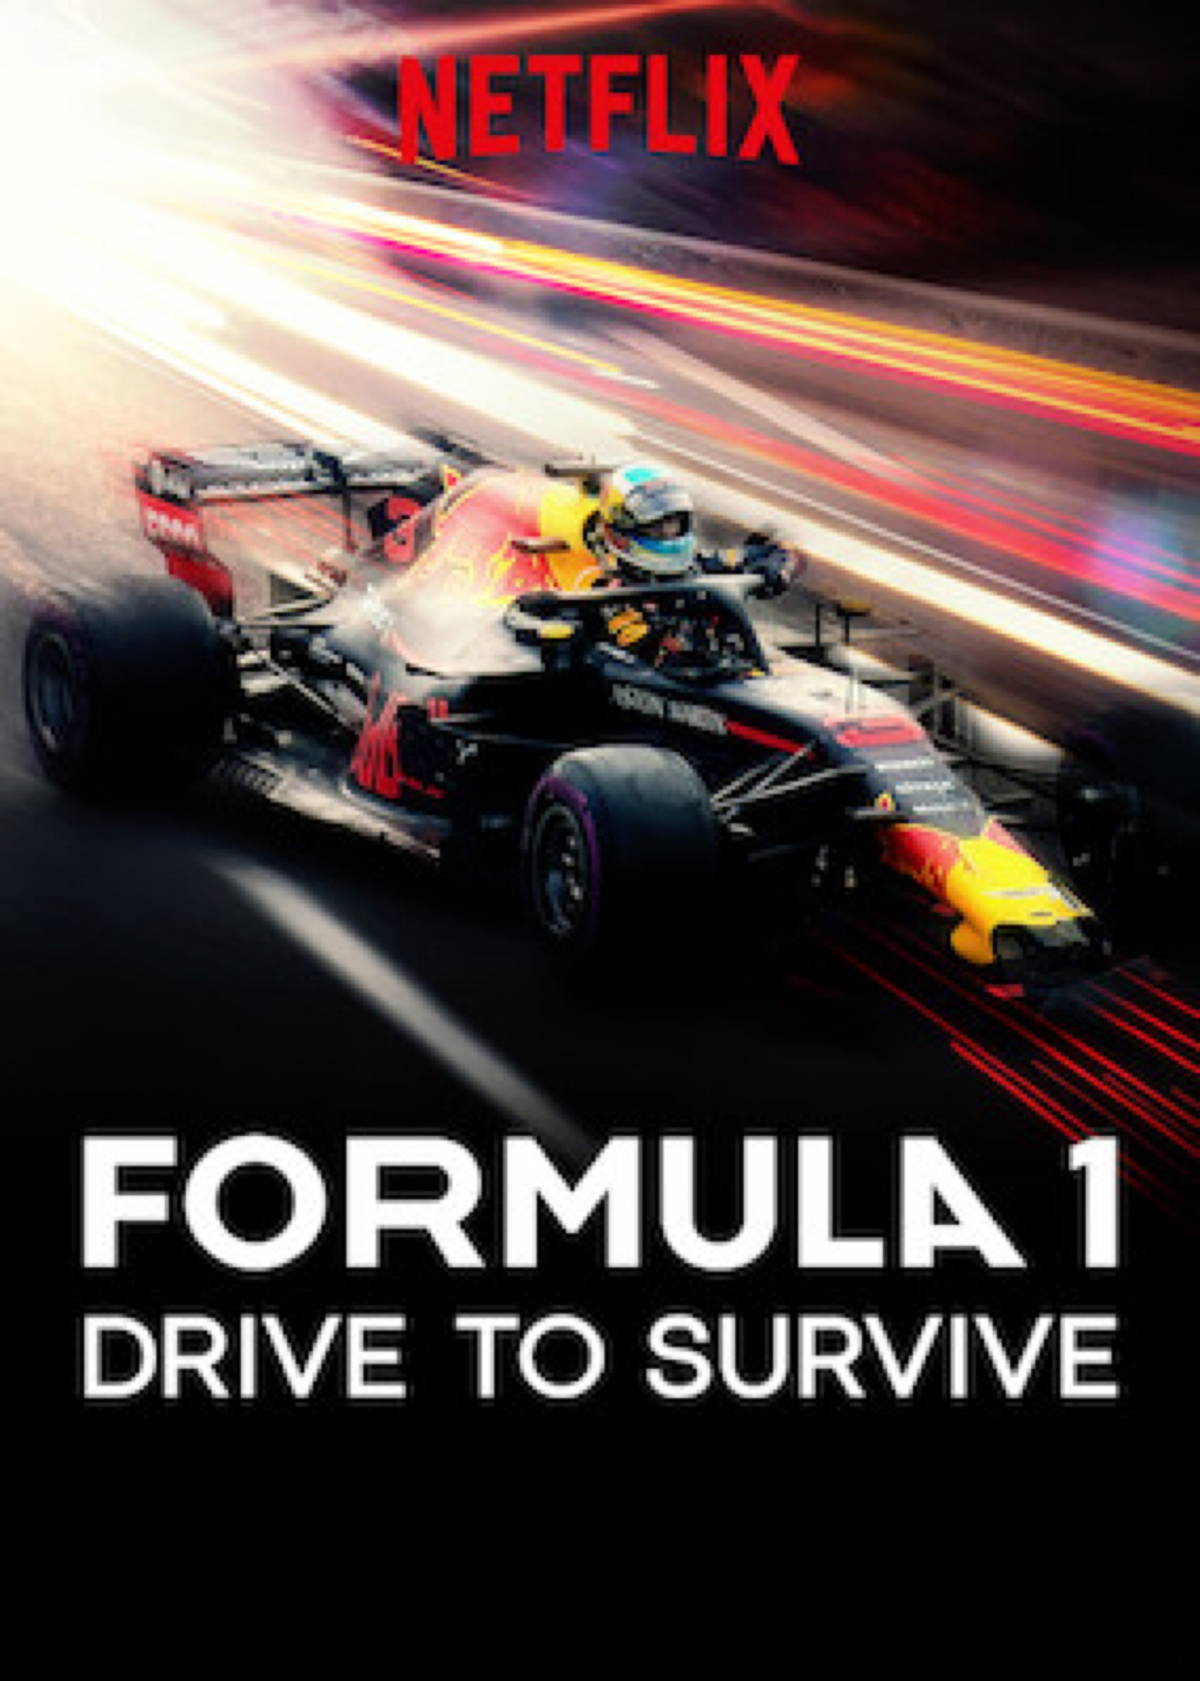 Formula 1: Drive to Survive Season 1 Episode 2 “The King of Spain”